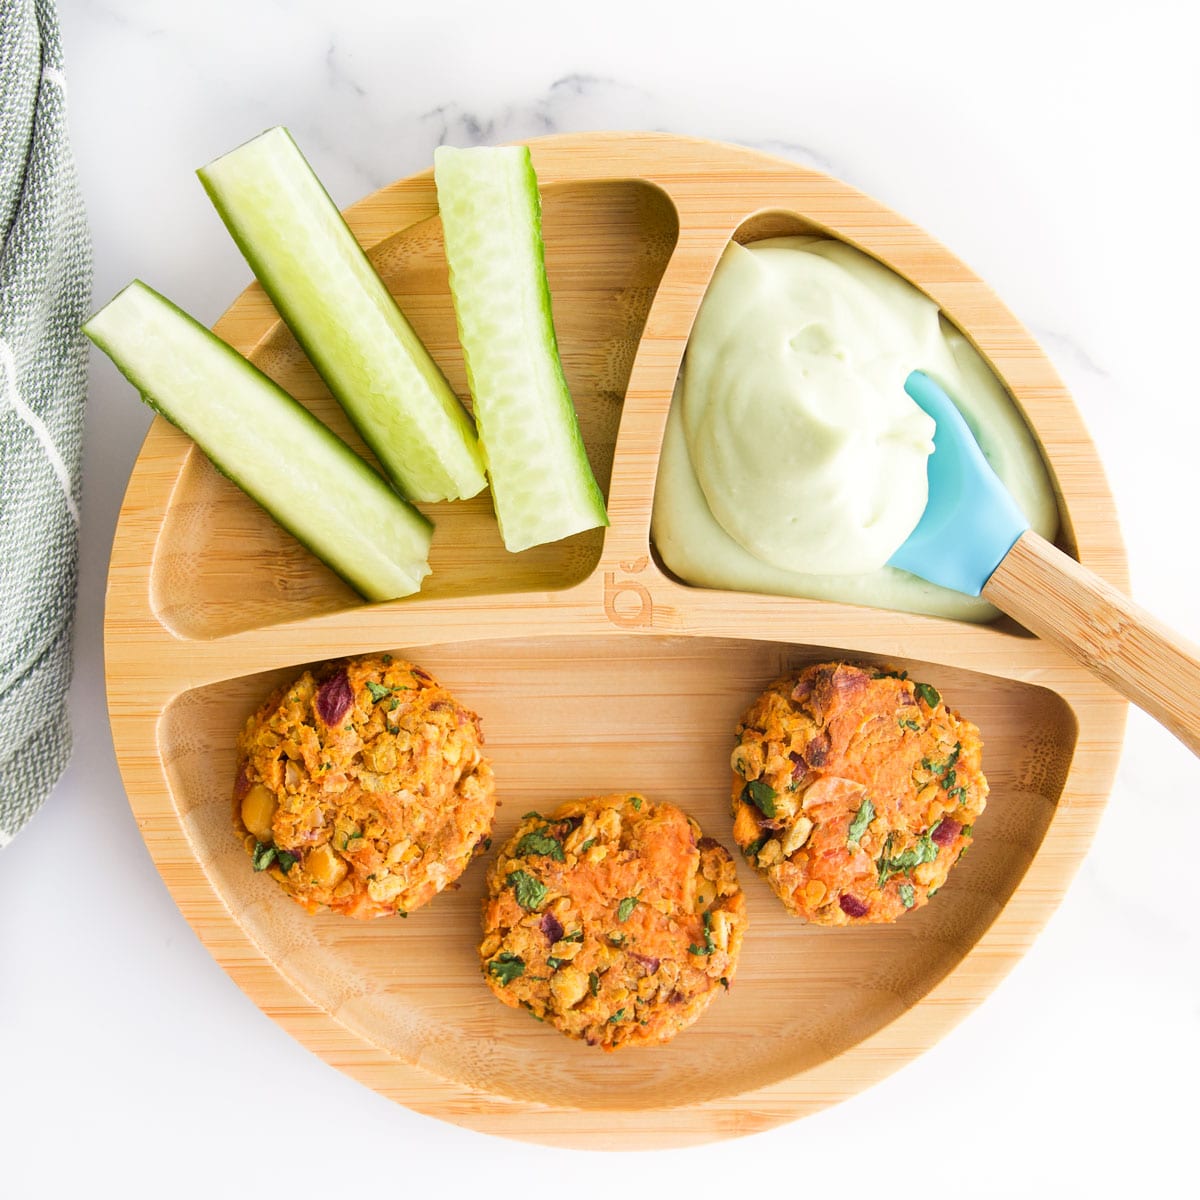 Sweet Potato Chickpea Cakes on Baby/Toddler Bamboo Plate Served with Avocado Dip and Cucumber Sticks.